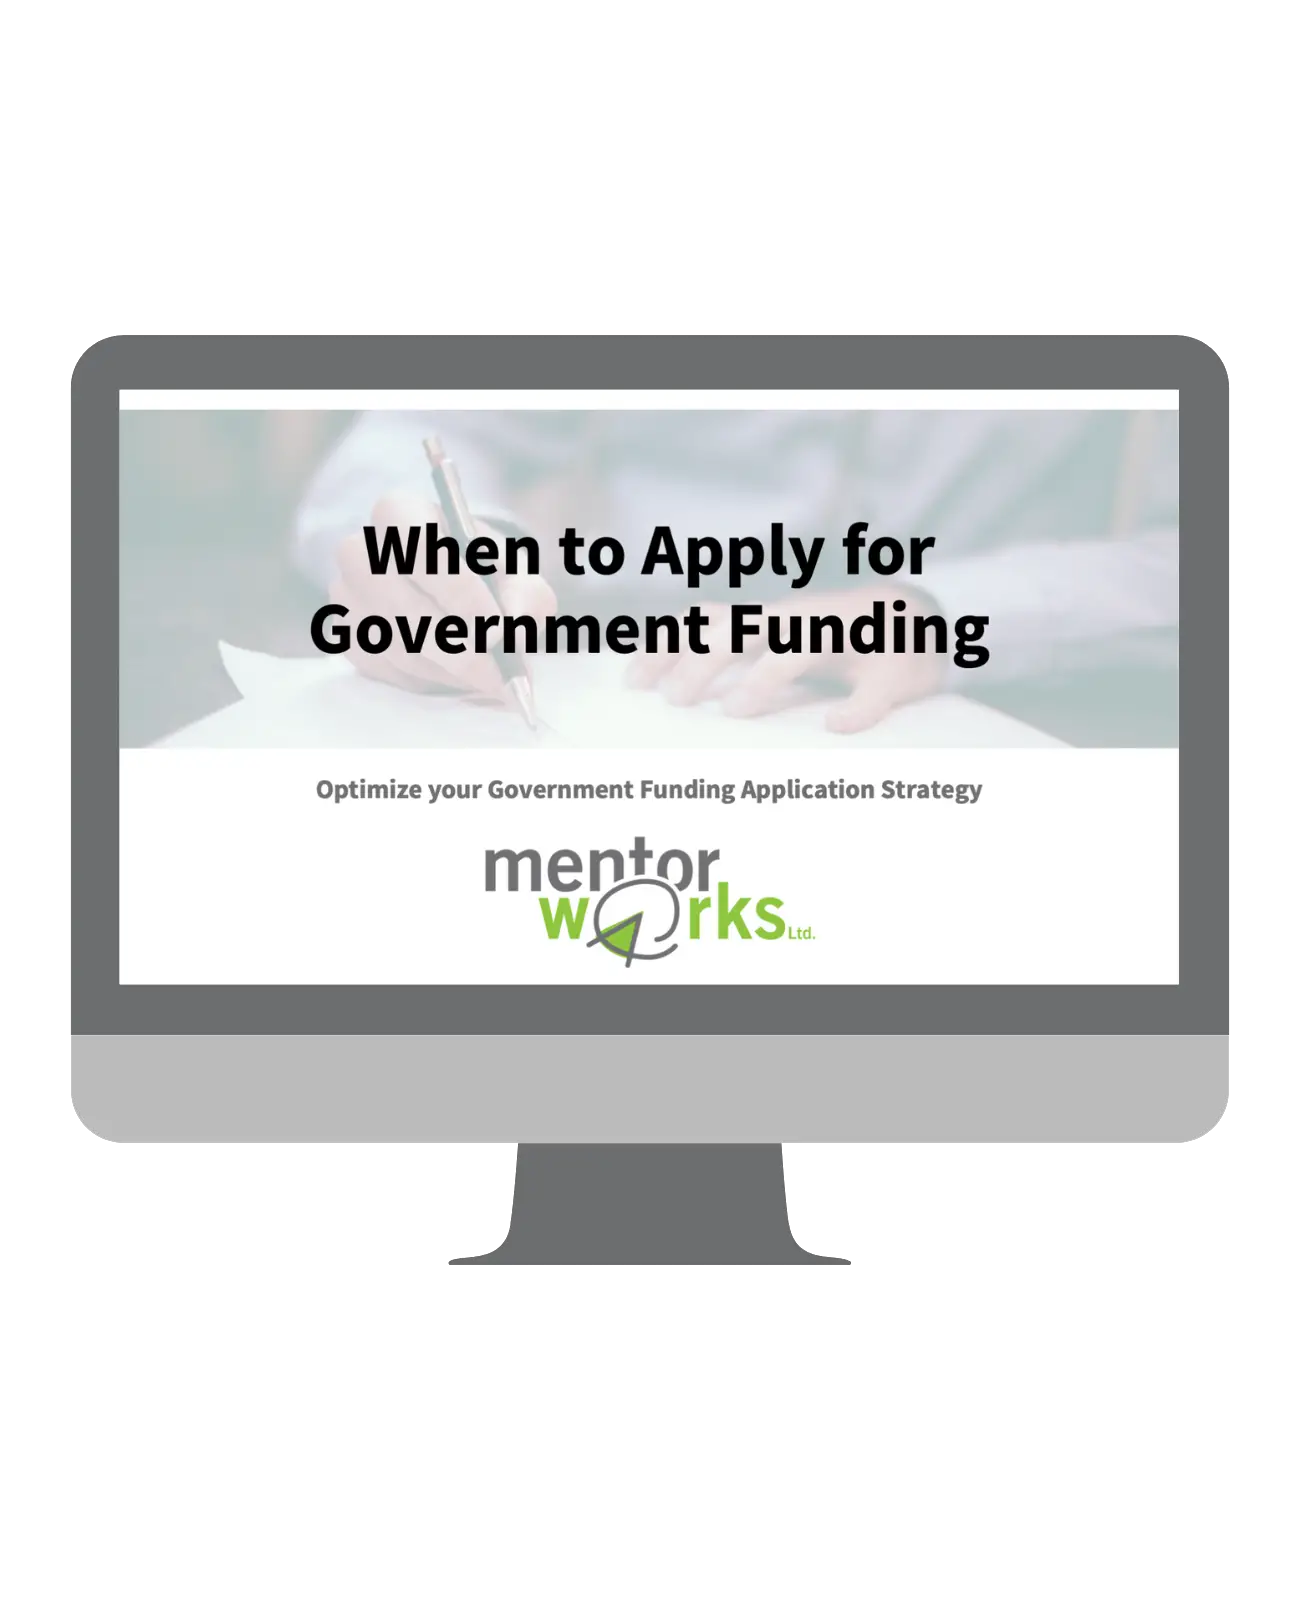 Download: When to Apply for Government Funding